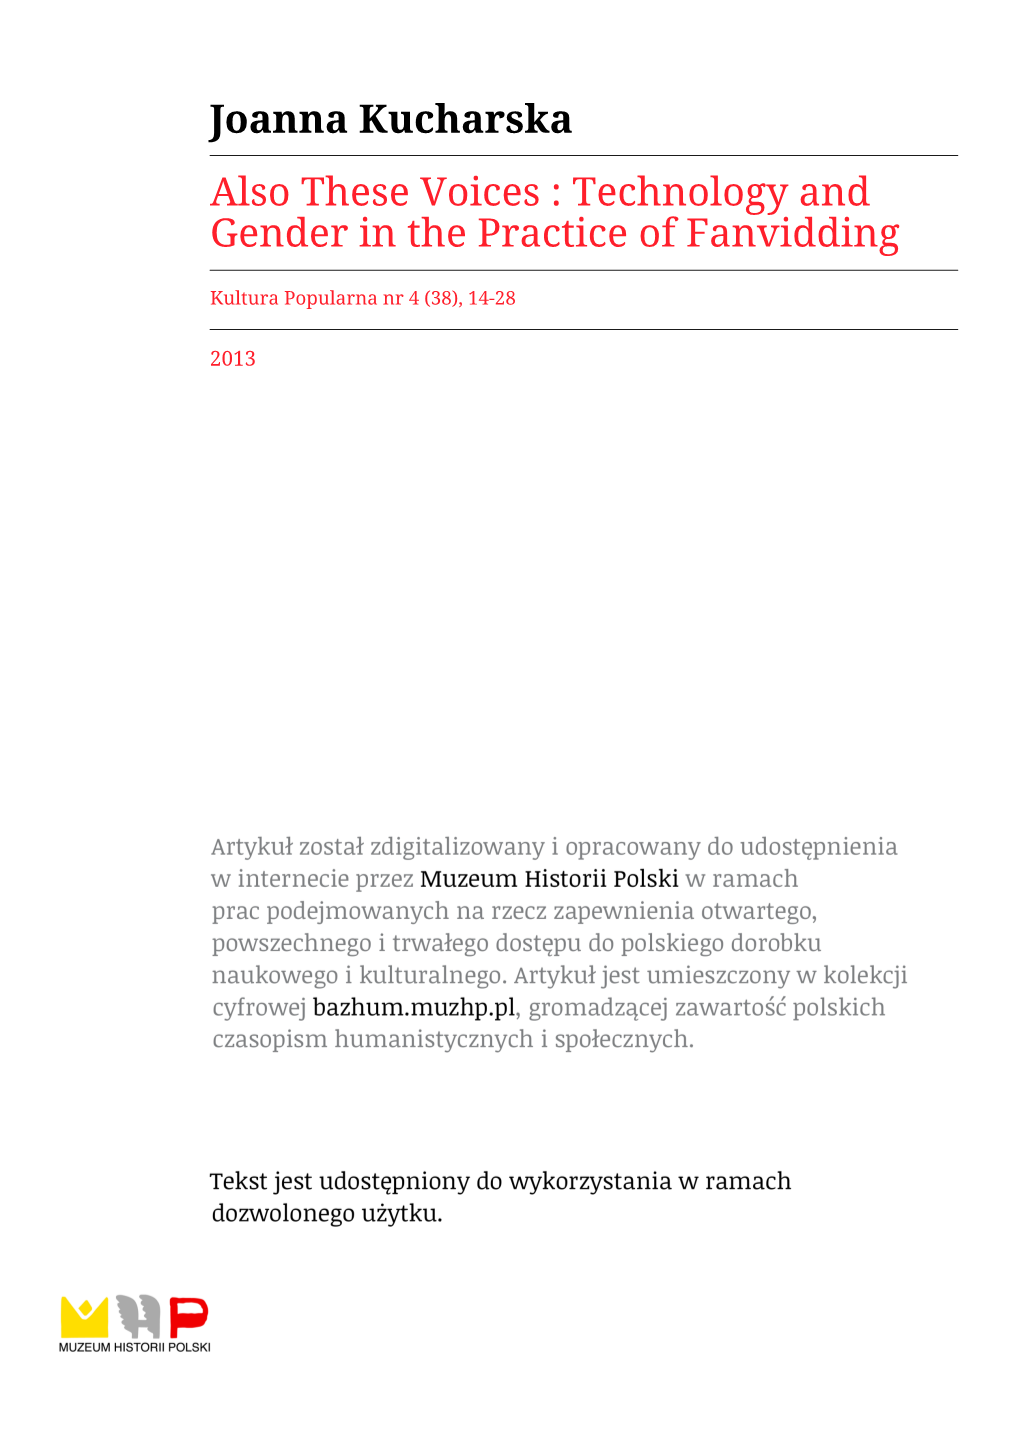 Joanna Kucharska Also These Voices : Technology and Gender in the Practice of Fanvidding